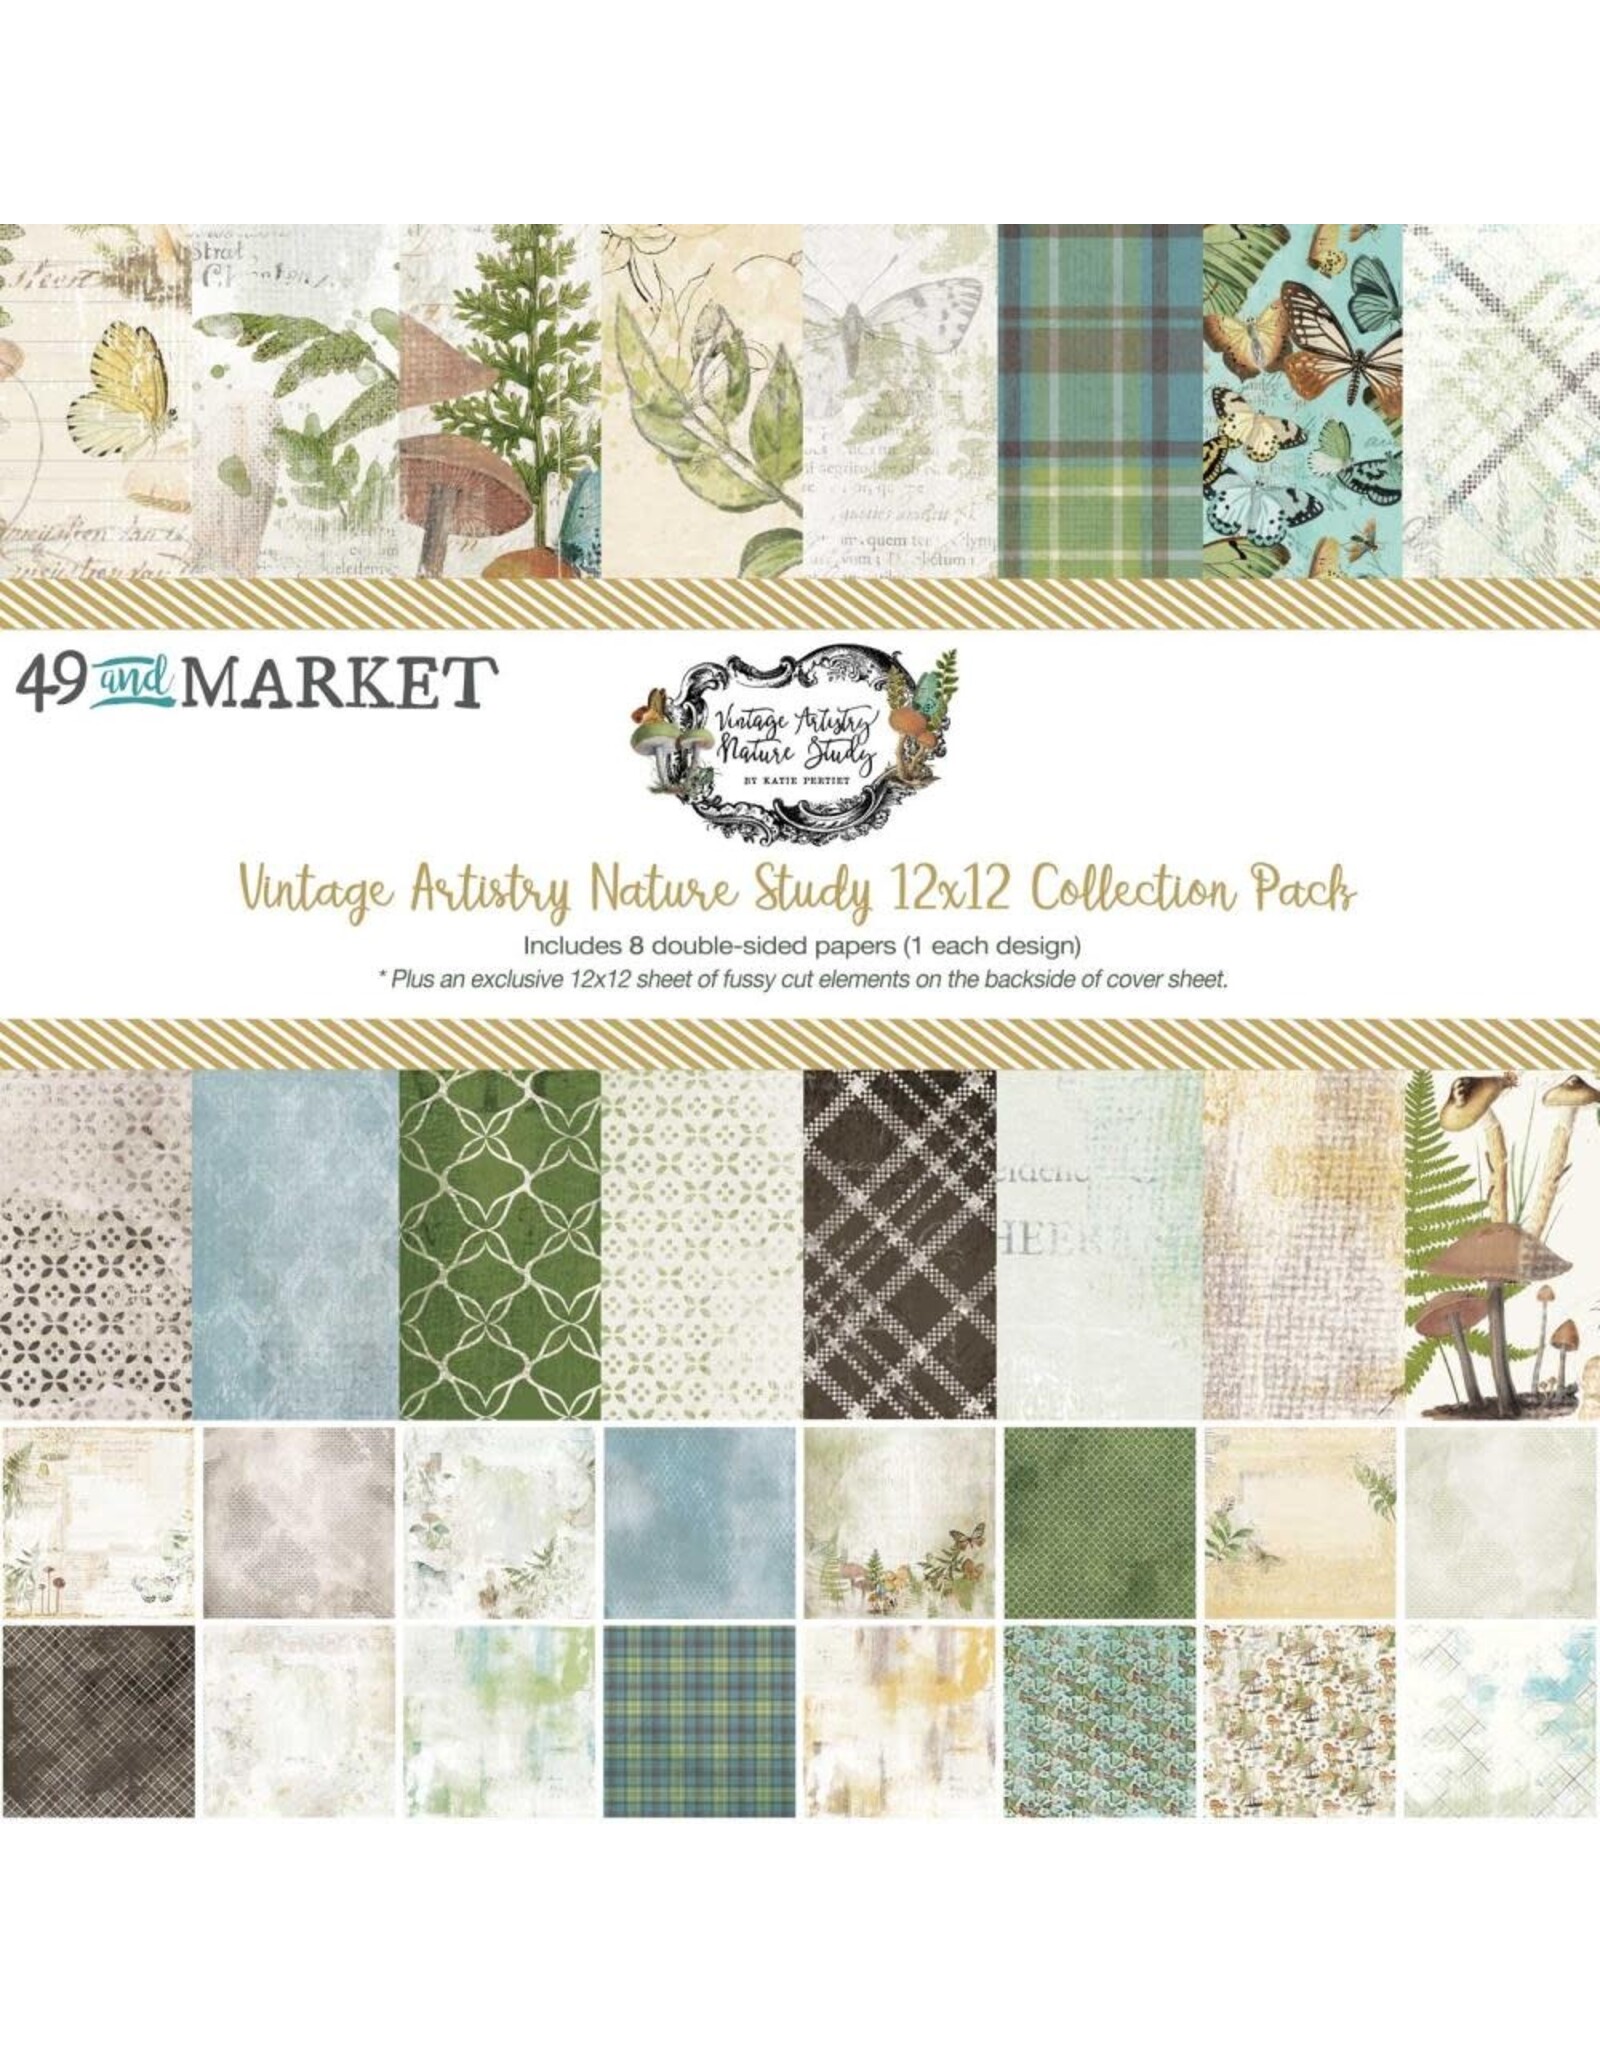 49 AND MARKET 49 AND MARKET VINTAGE ARTISTRY NATURE STUDY 12x12 COLLECTION PACK